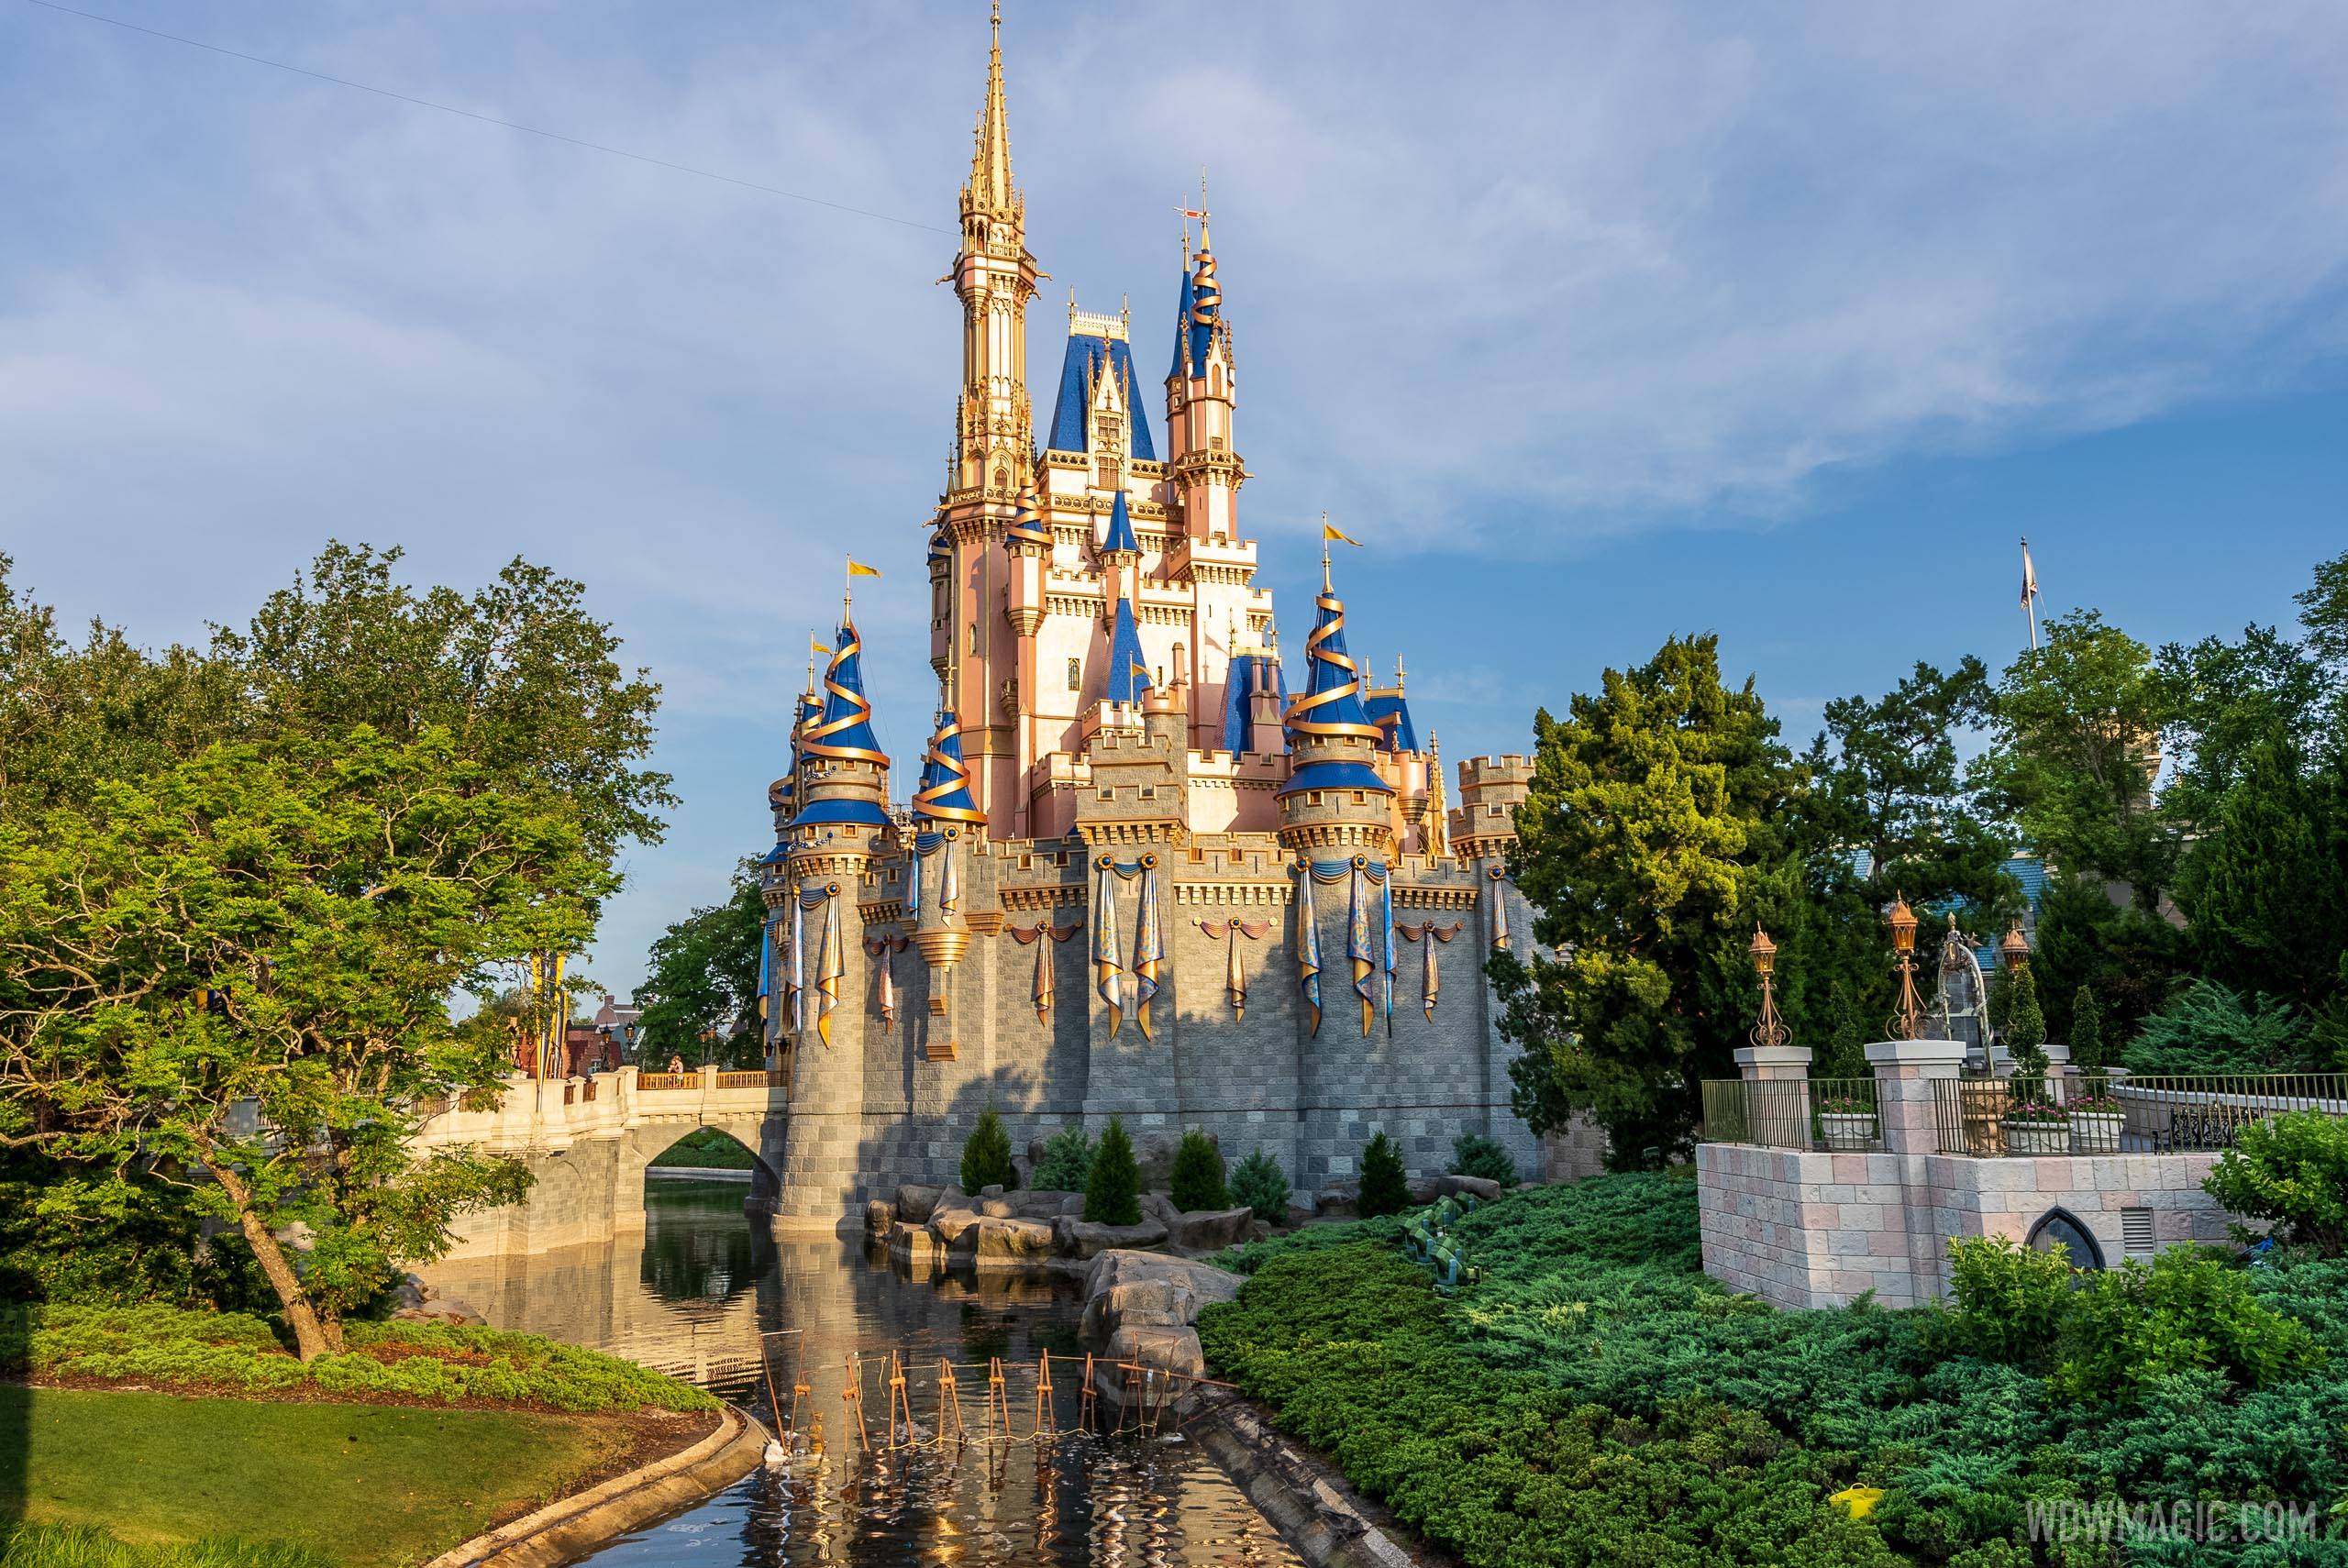 Moat refilled at Cinderella Castle - May 2021